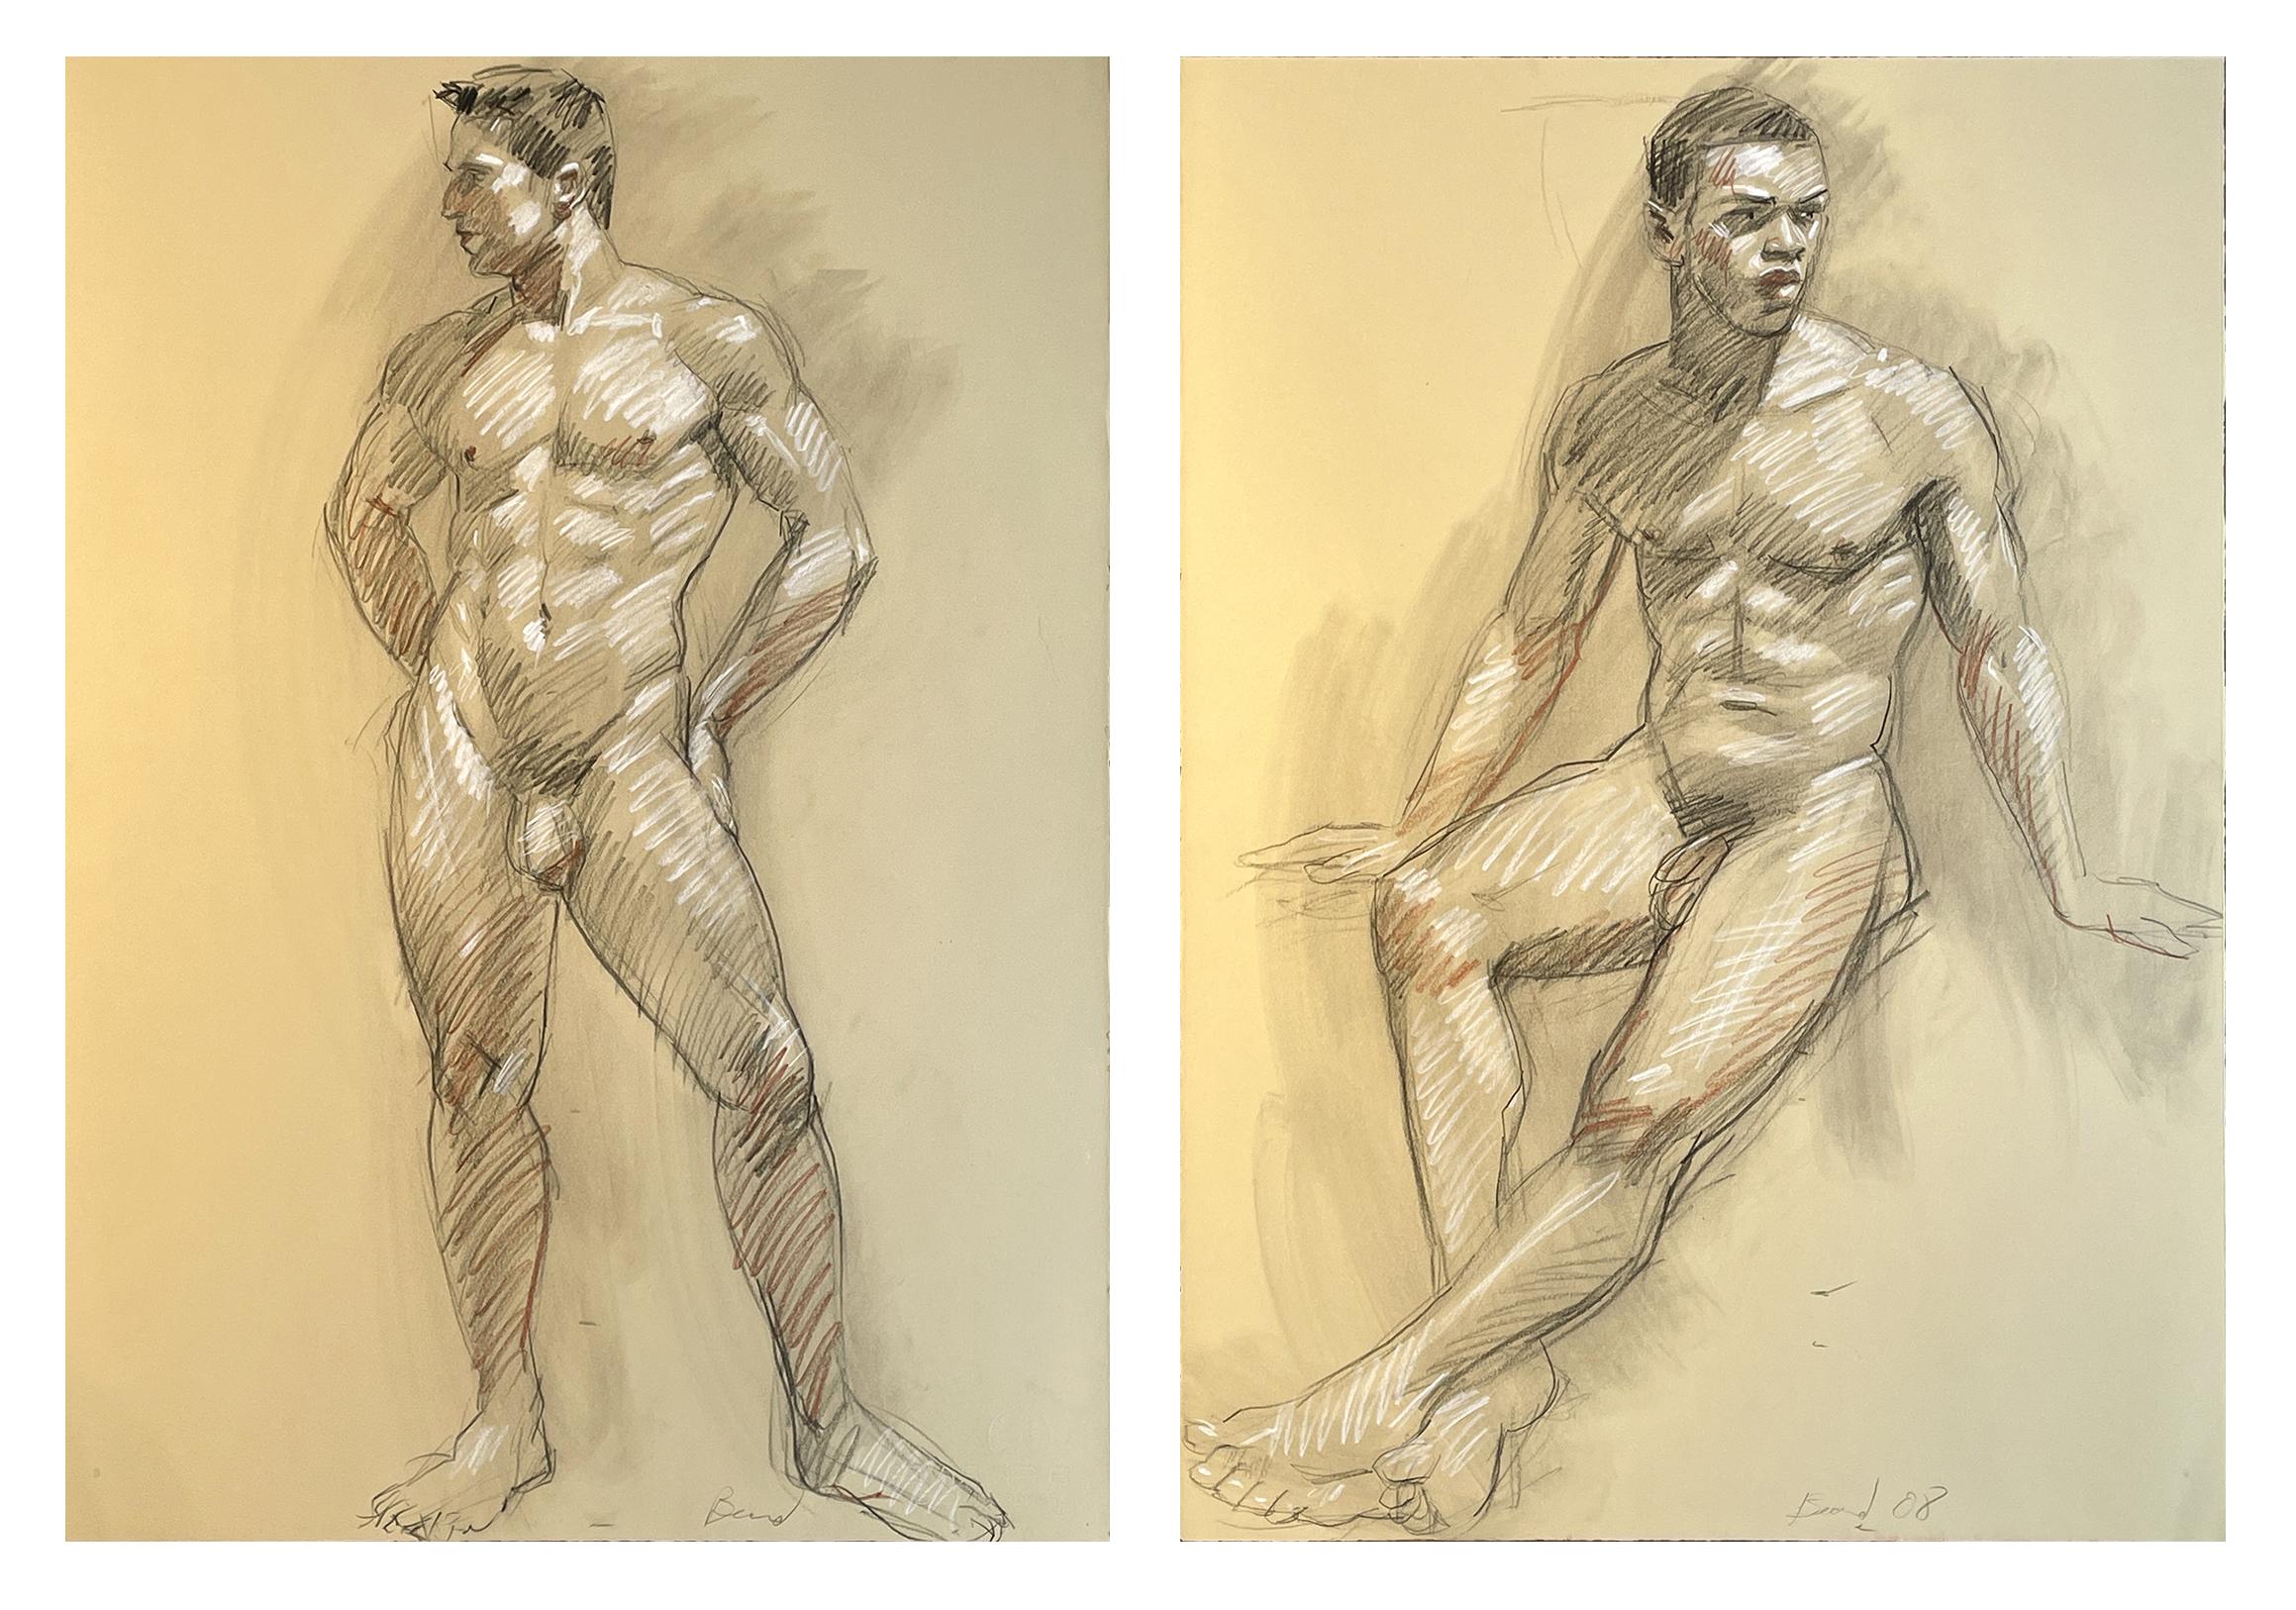 Figurative, academic style life drawing of male nude with charcoal and graphite by Mark Beard, "MB 824"
graphite, Conte crayon and charcoal on Arches paper
30.5 x 21 inches unframed
Signed, lower center

Strong facial features and upper body muscles